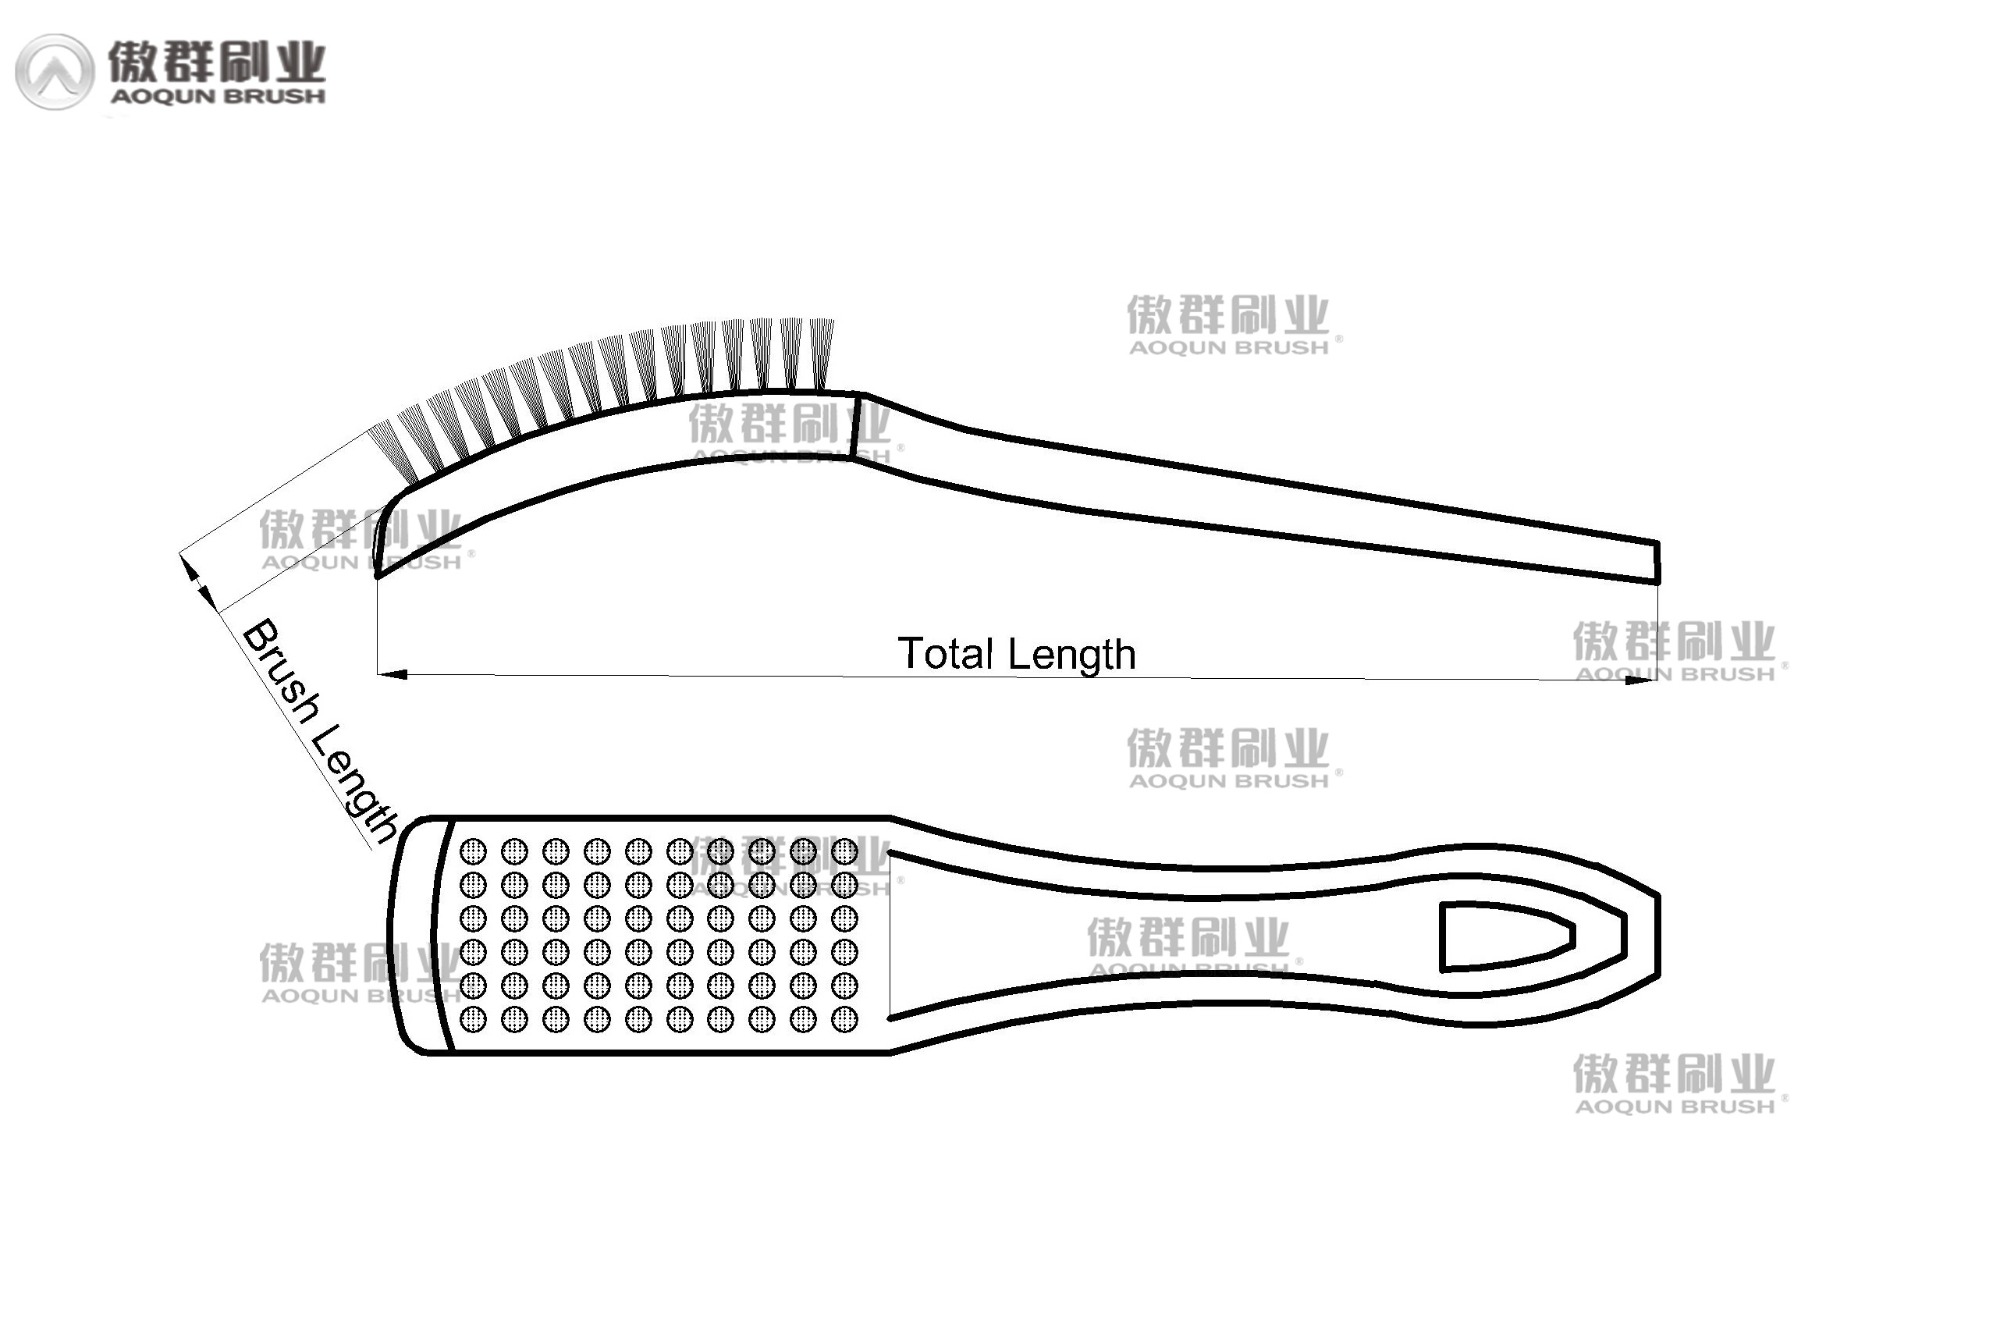 Instrument Cleaning Brushes drawing